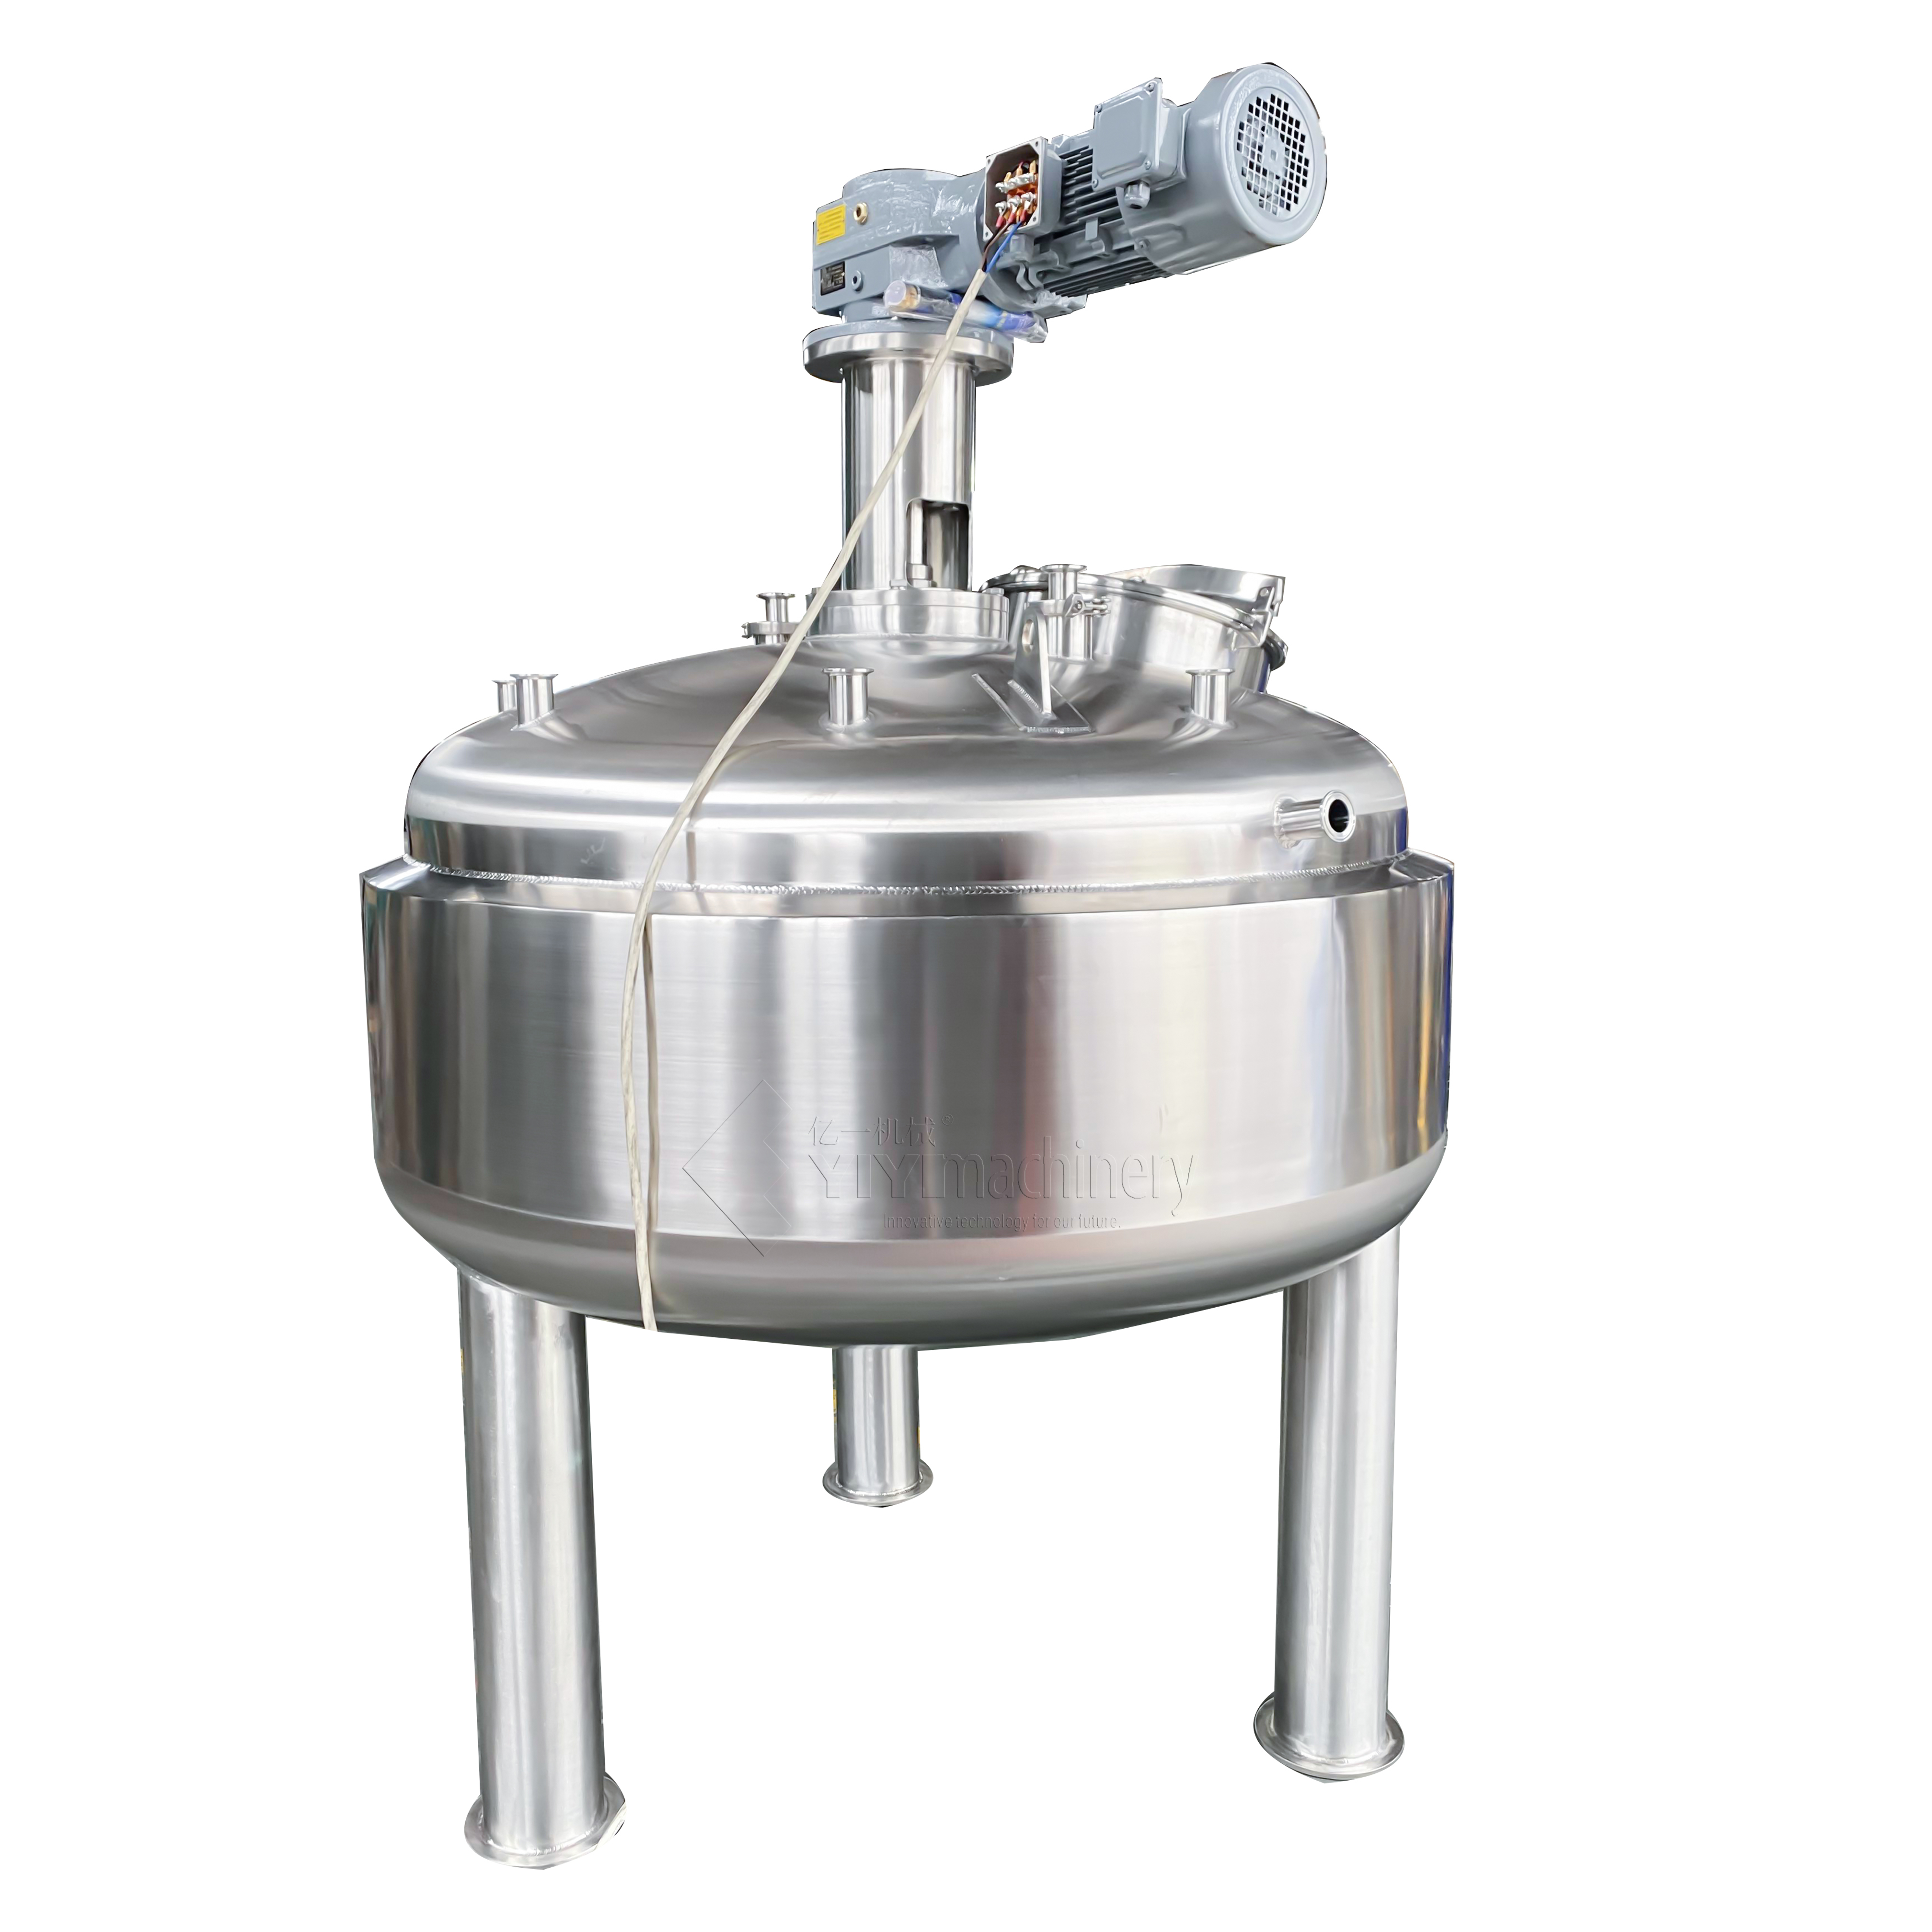 Stainless Steel Chemical Machine Equipment Liquid Detergent Making Machine Agitator/Paddle Mixer Toothpaste Mixing Tank-1000L 200L 500L 